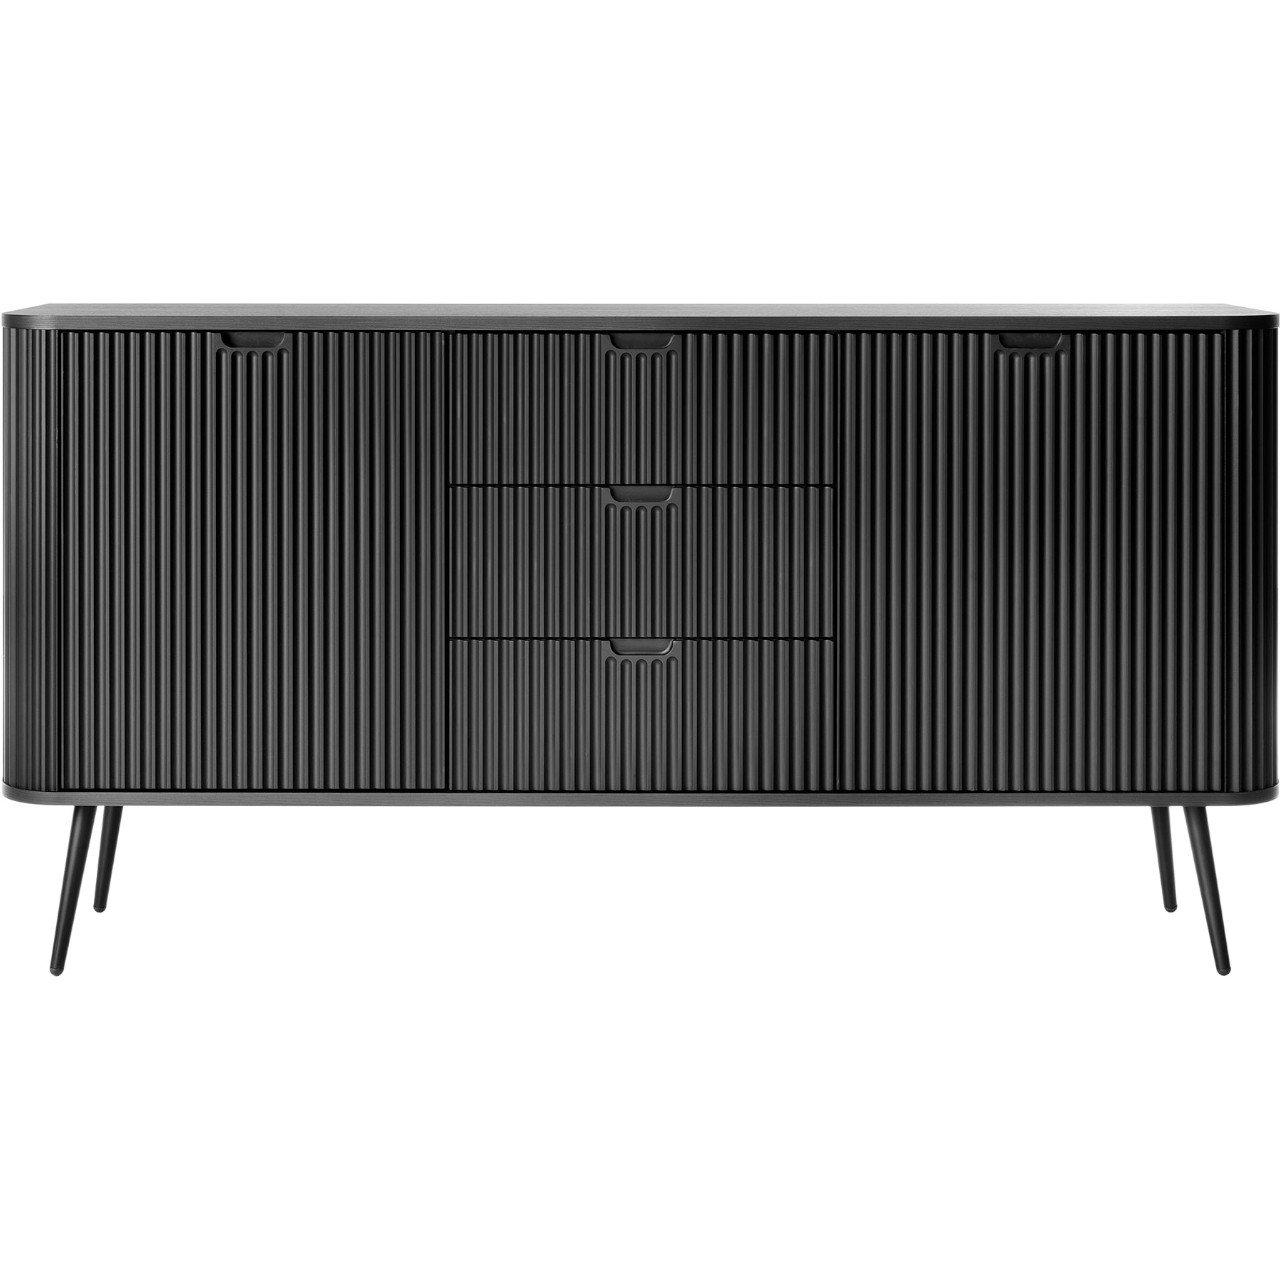 Chest of drawers ZOVI 02 black